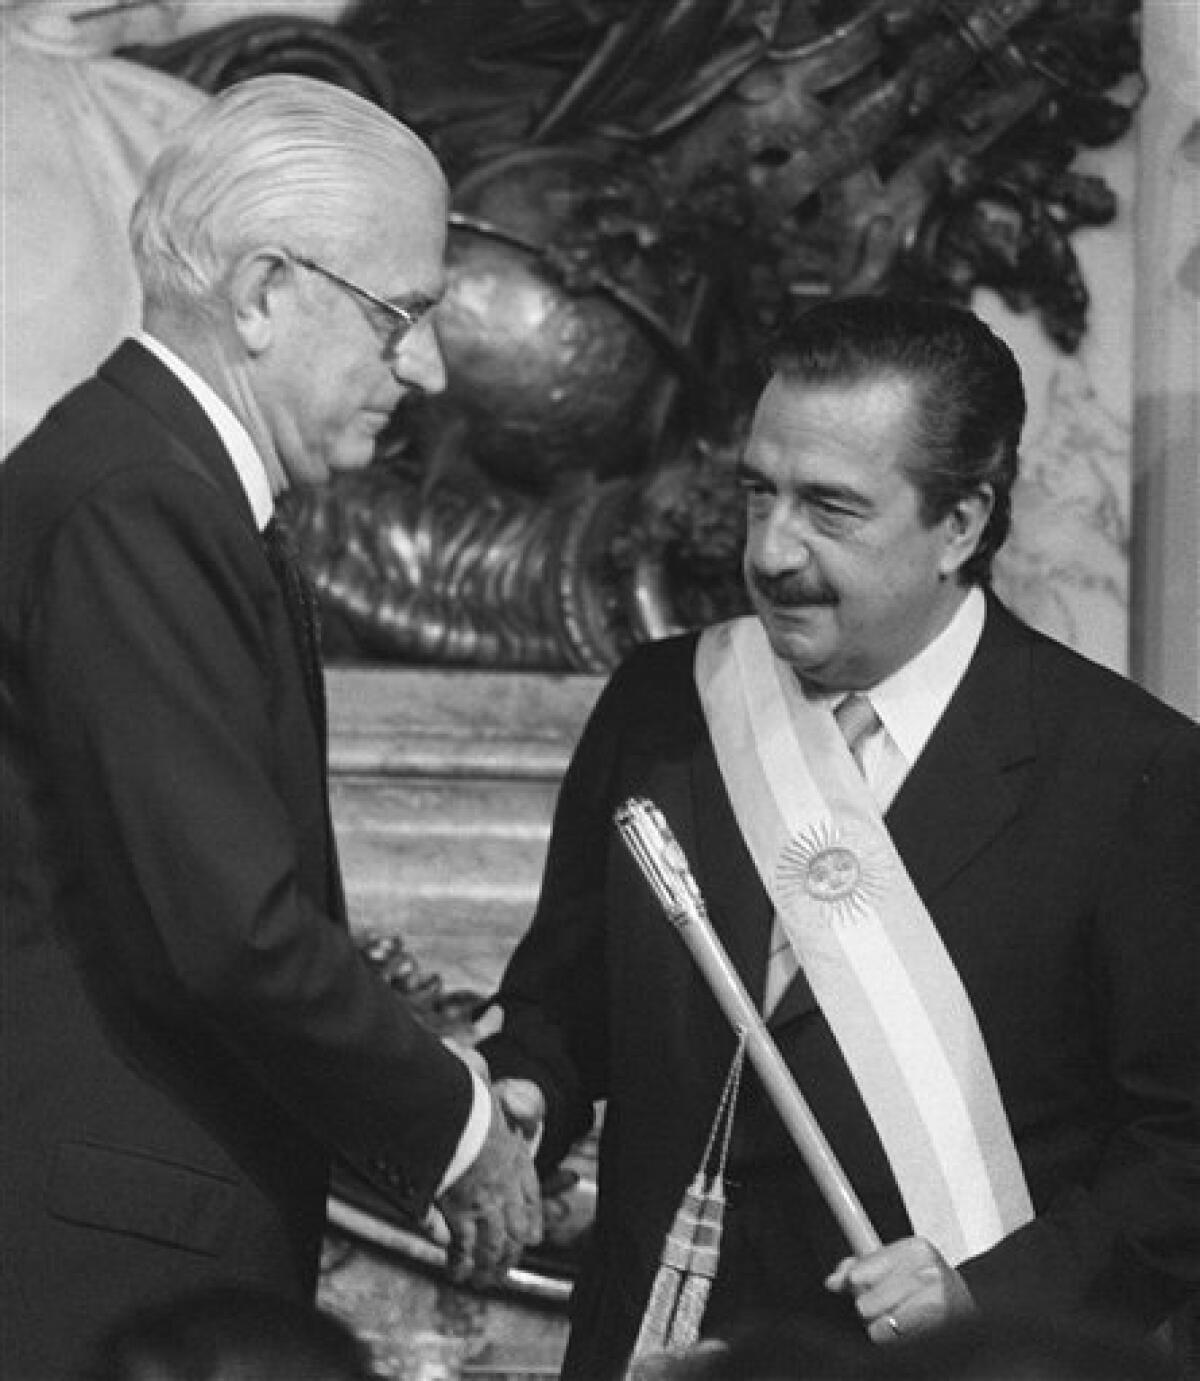 Former Argentina's President Raul Alfonsin, right, shakes hands with outgoing dictator Gen. Reynaldo Bignone in this Dec. 10, 1983 file photo, during Alfonsin�s inauguration ceremony. Alfonsin, the first democratically elected president following the end of the 1976-1983 military dictatorship, died at age 82 Tuesday, March 31, 2009, after suffering from lung cancer and pneumonia. (AP Photo/Eduardo Di Baia)